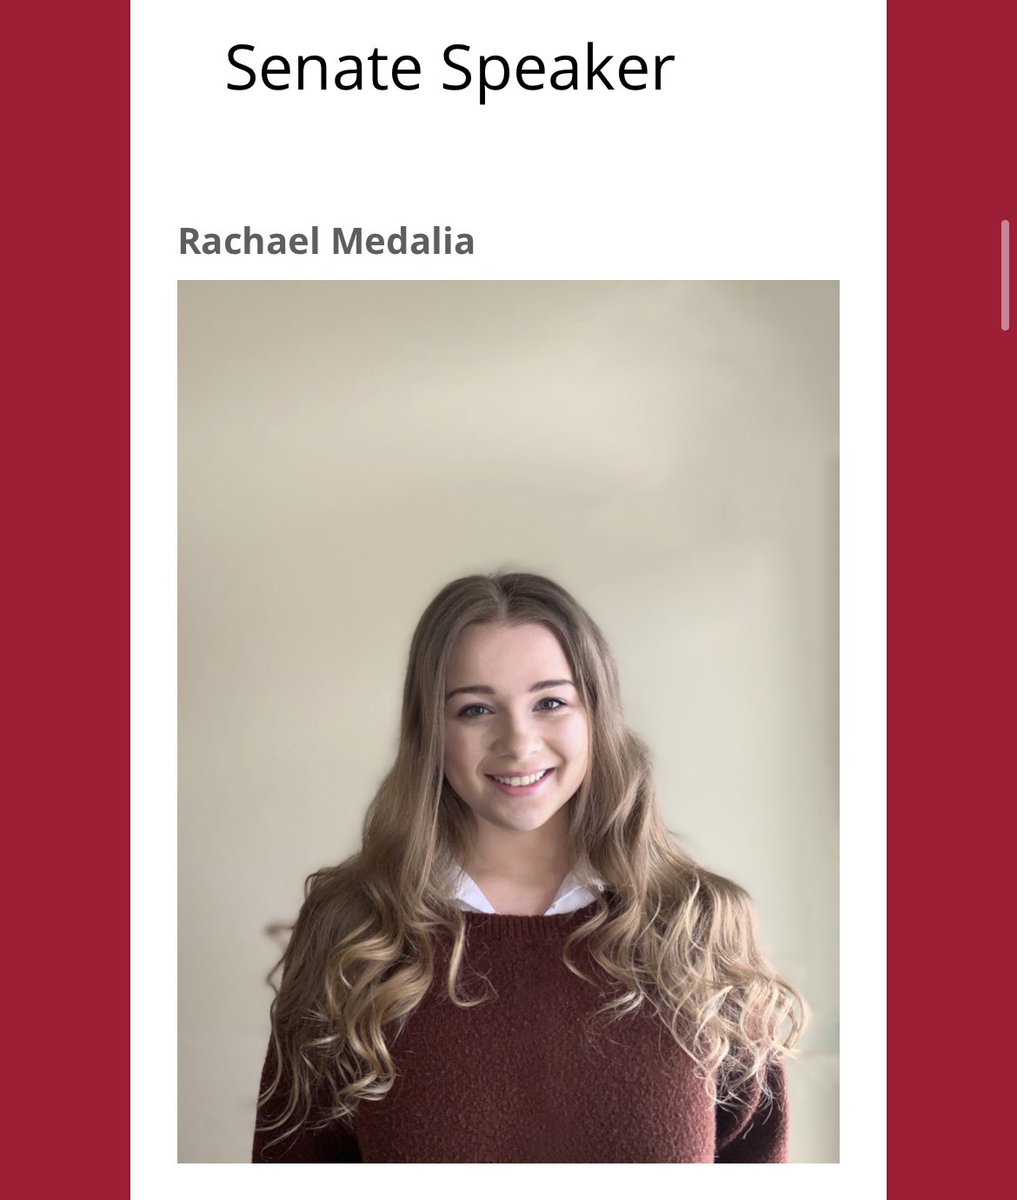 Senate Speaker: Rachael Medalia - 138 votes ASCWU Director for Equity & Multicultural Affairs: Mariah Minjarez - 5 out of 7 Equity and Service Council organizations voted